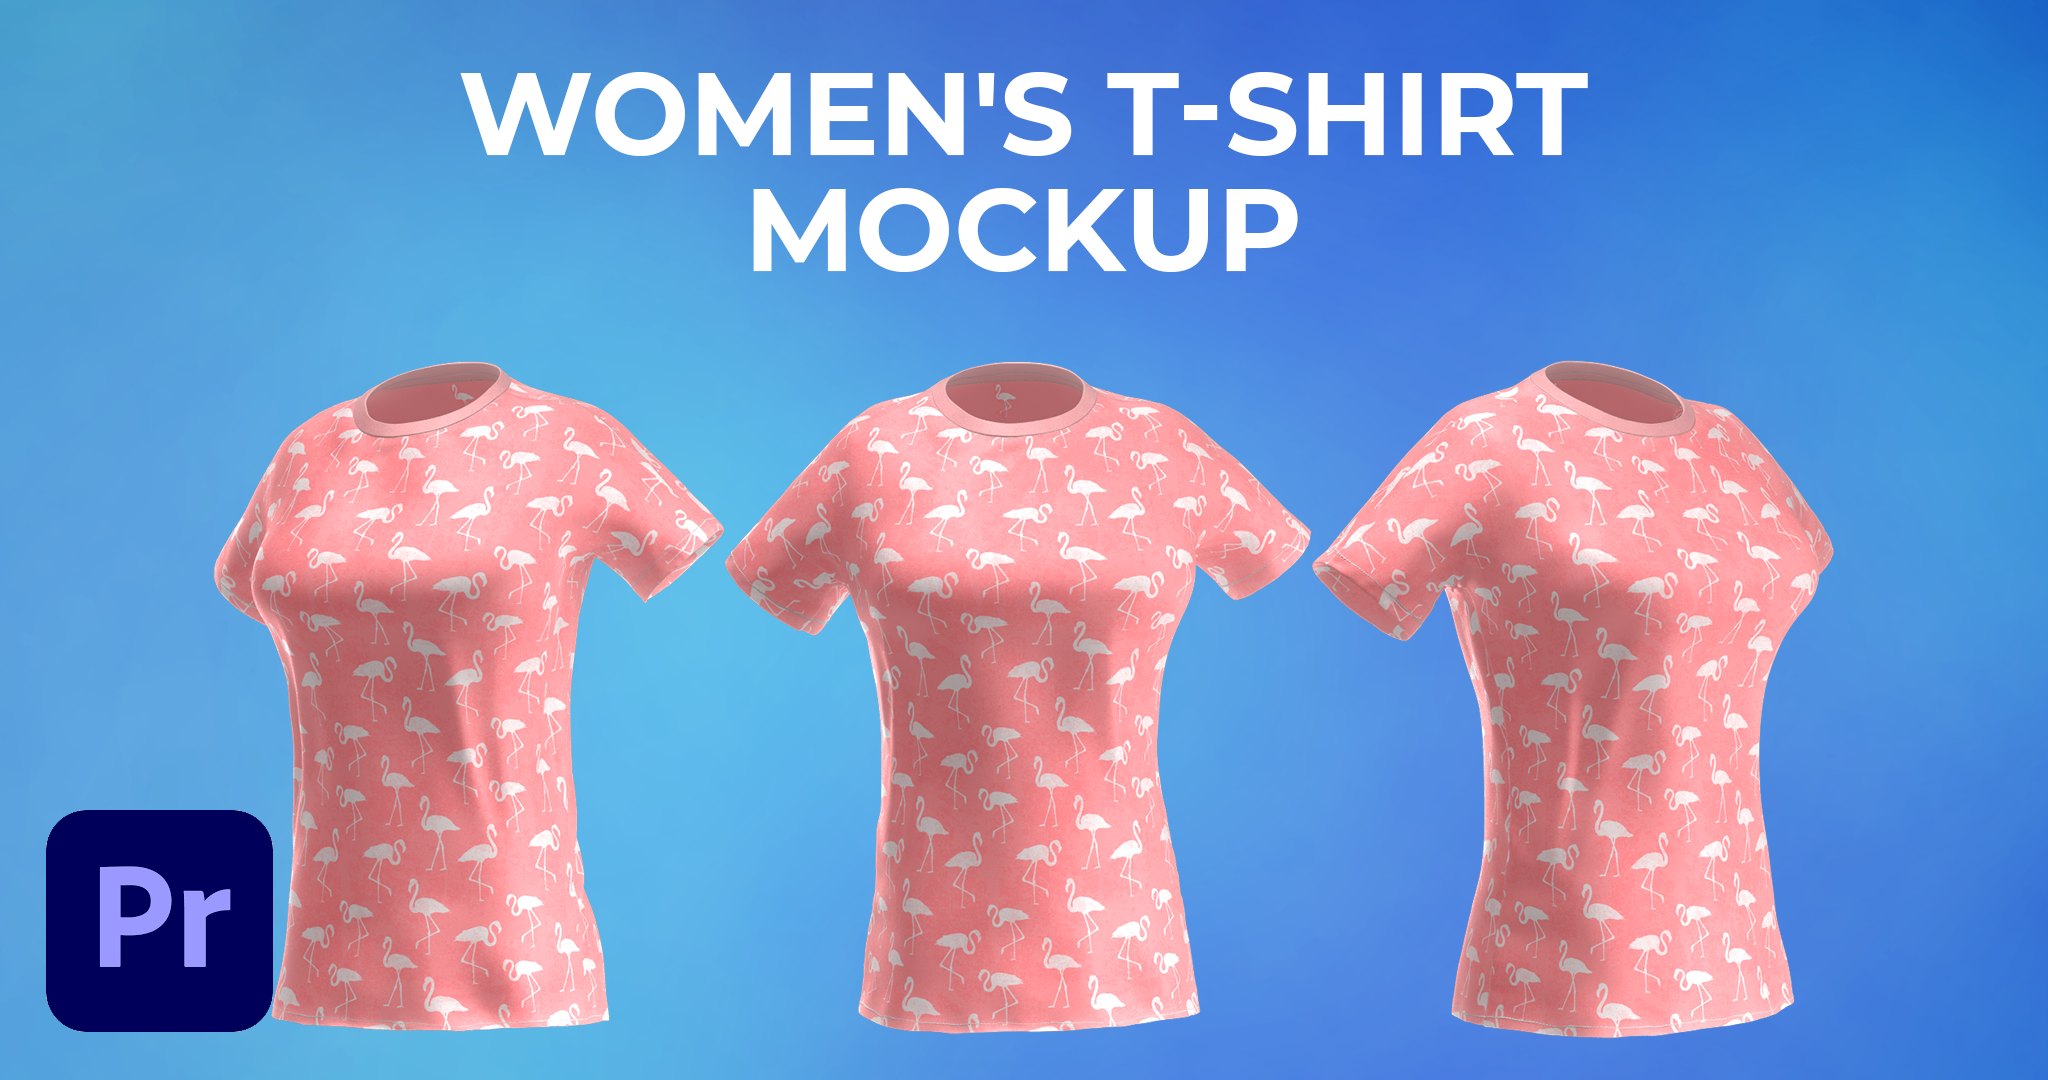 Womens T-shirt Mockup Template - Animated Mockup PREMIERE by 2DeadFrog